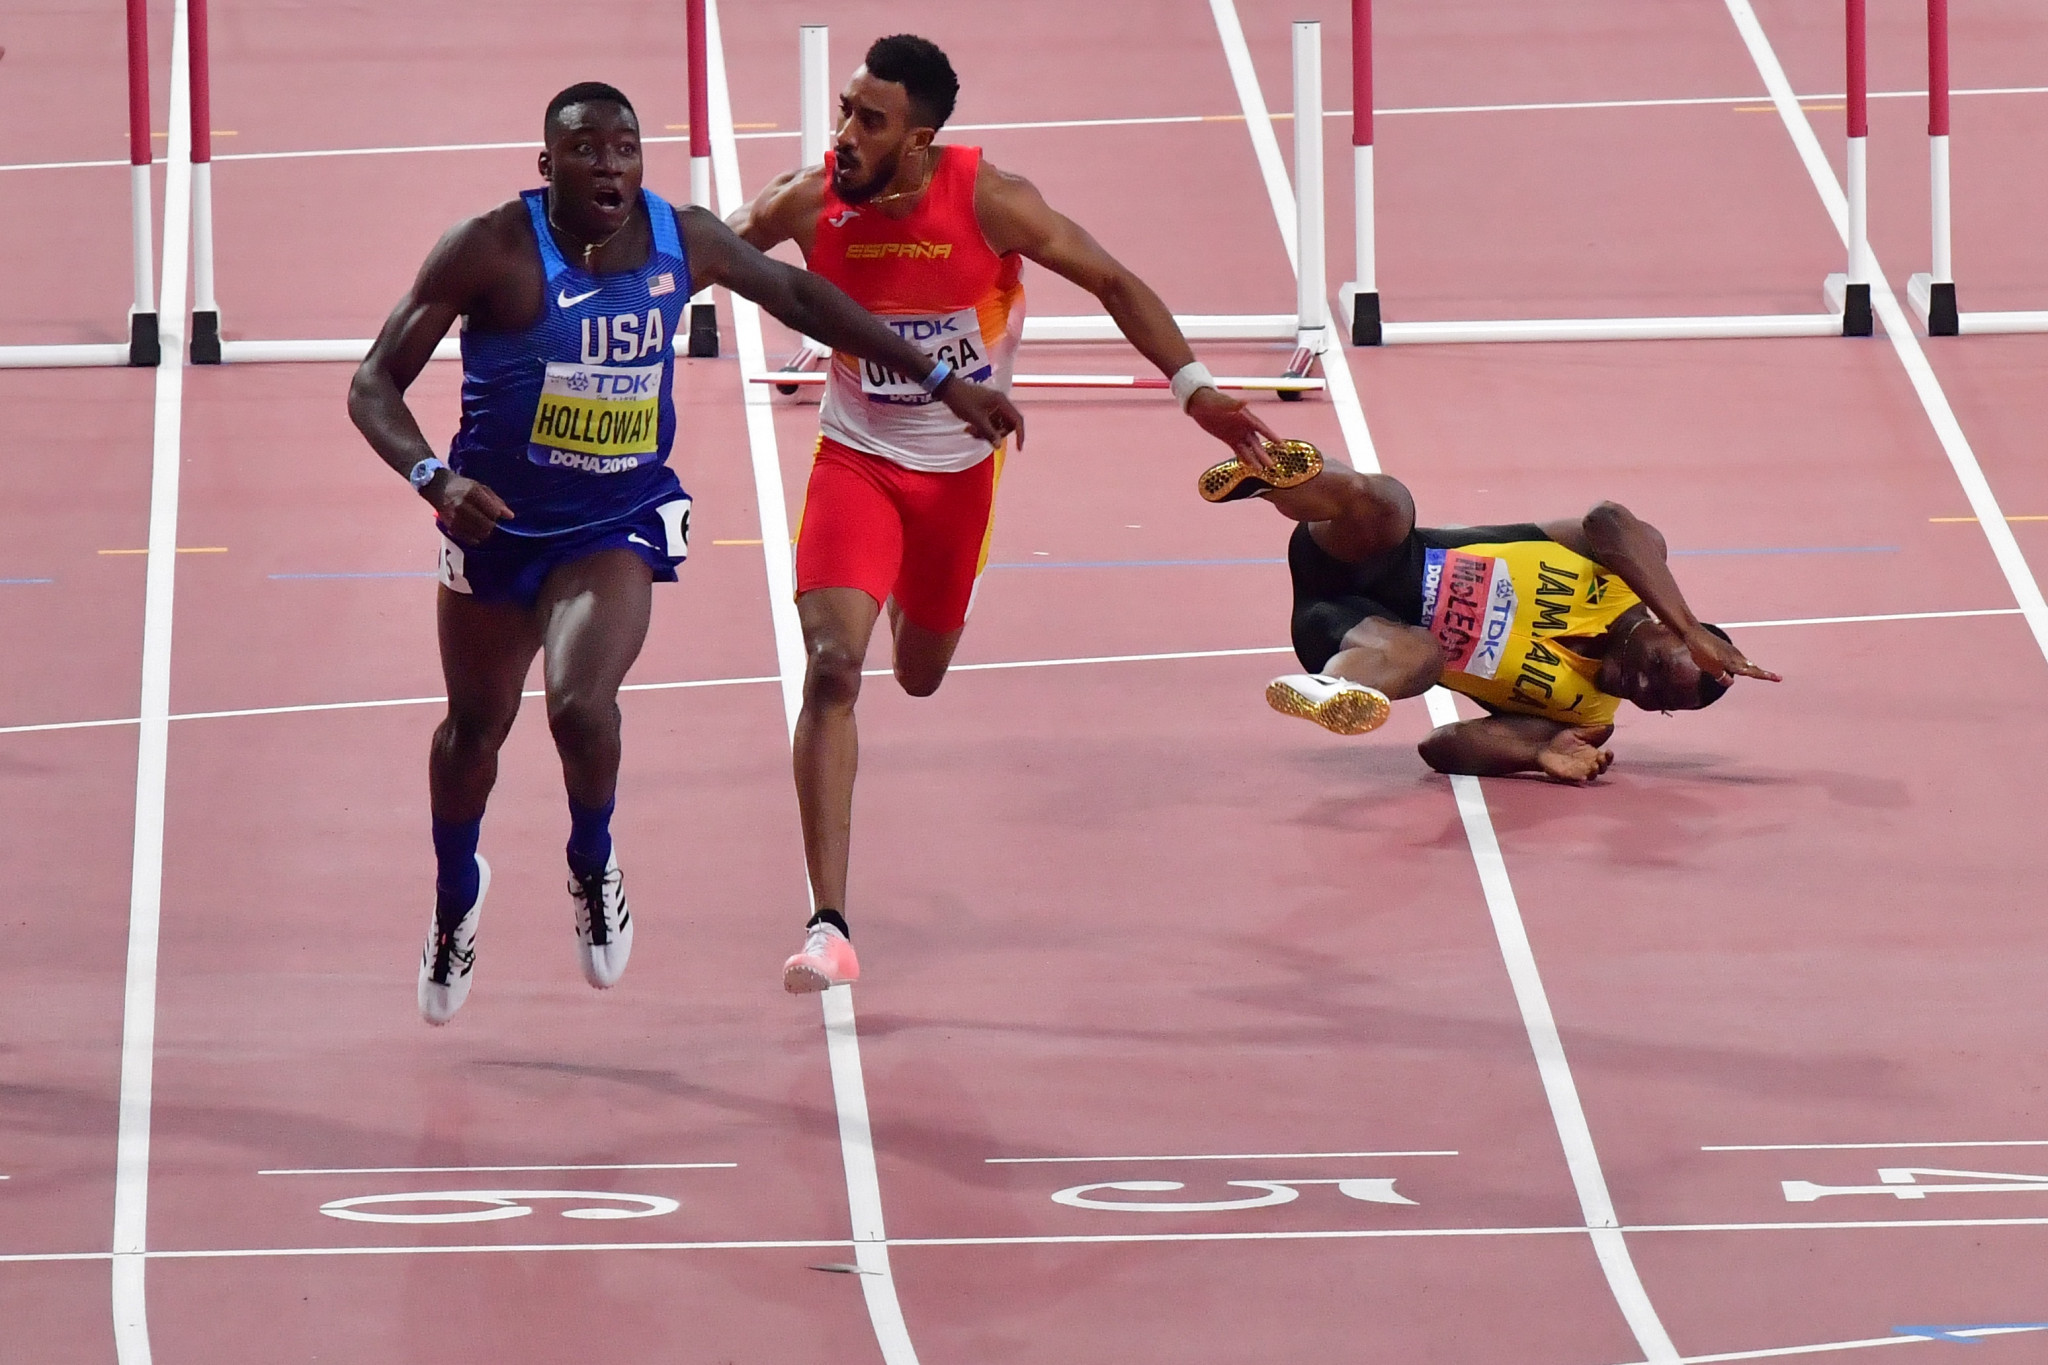 Grant Holloway wins the world 110m hurdles title in a chaotic final at Doha ©Getty Images